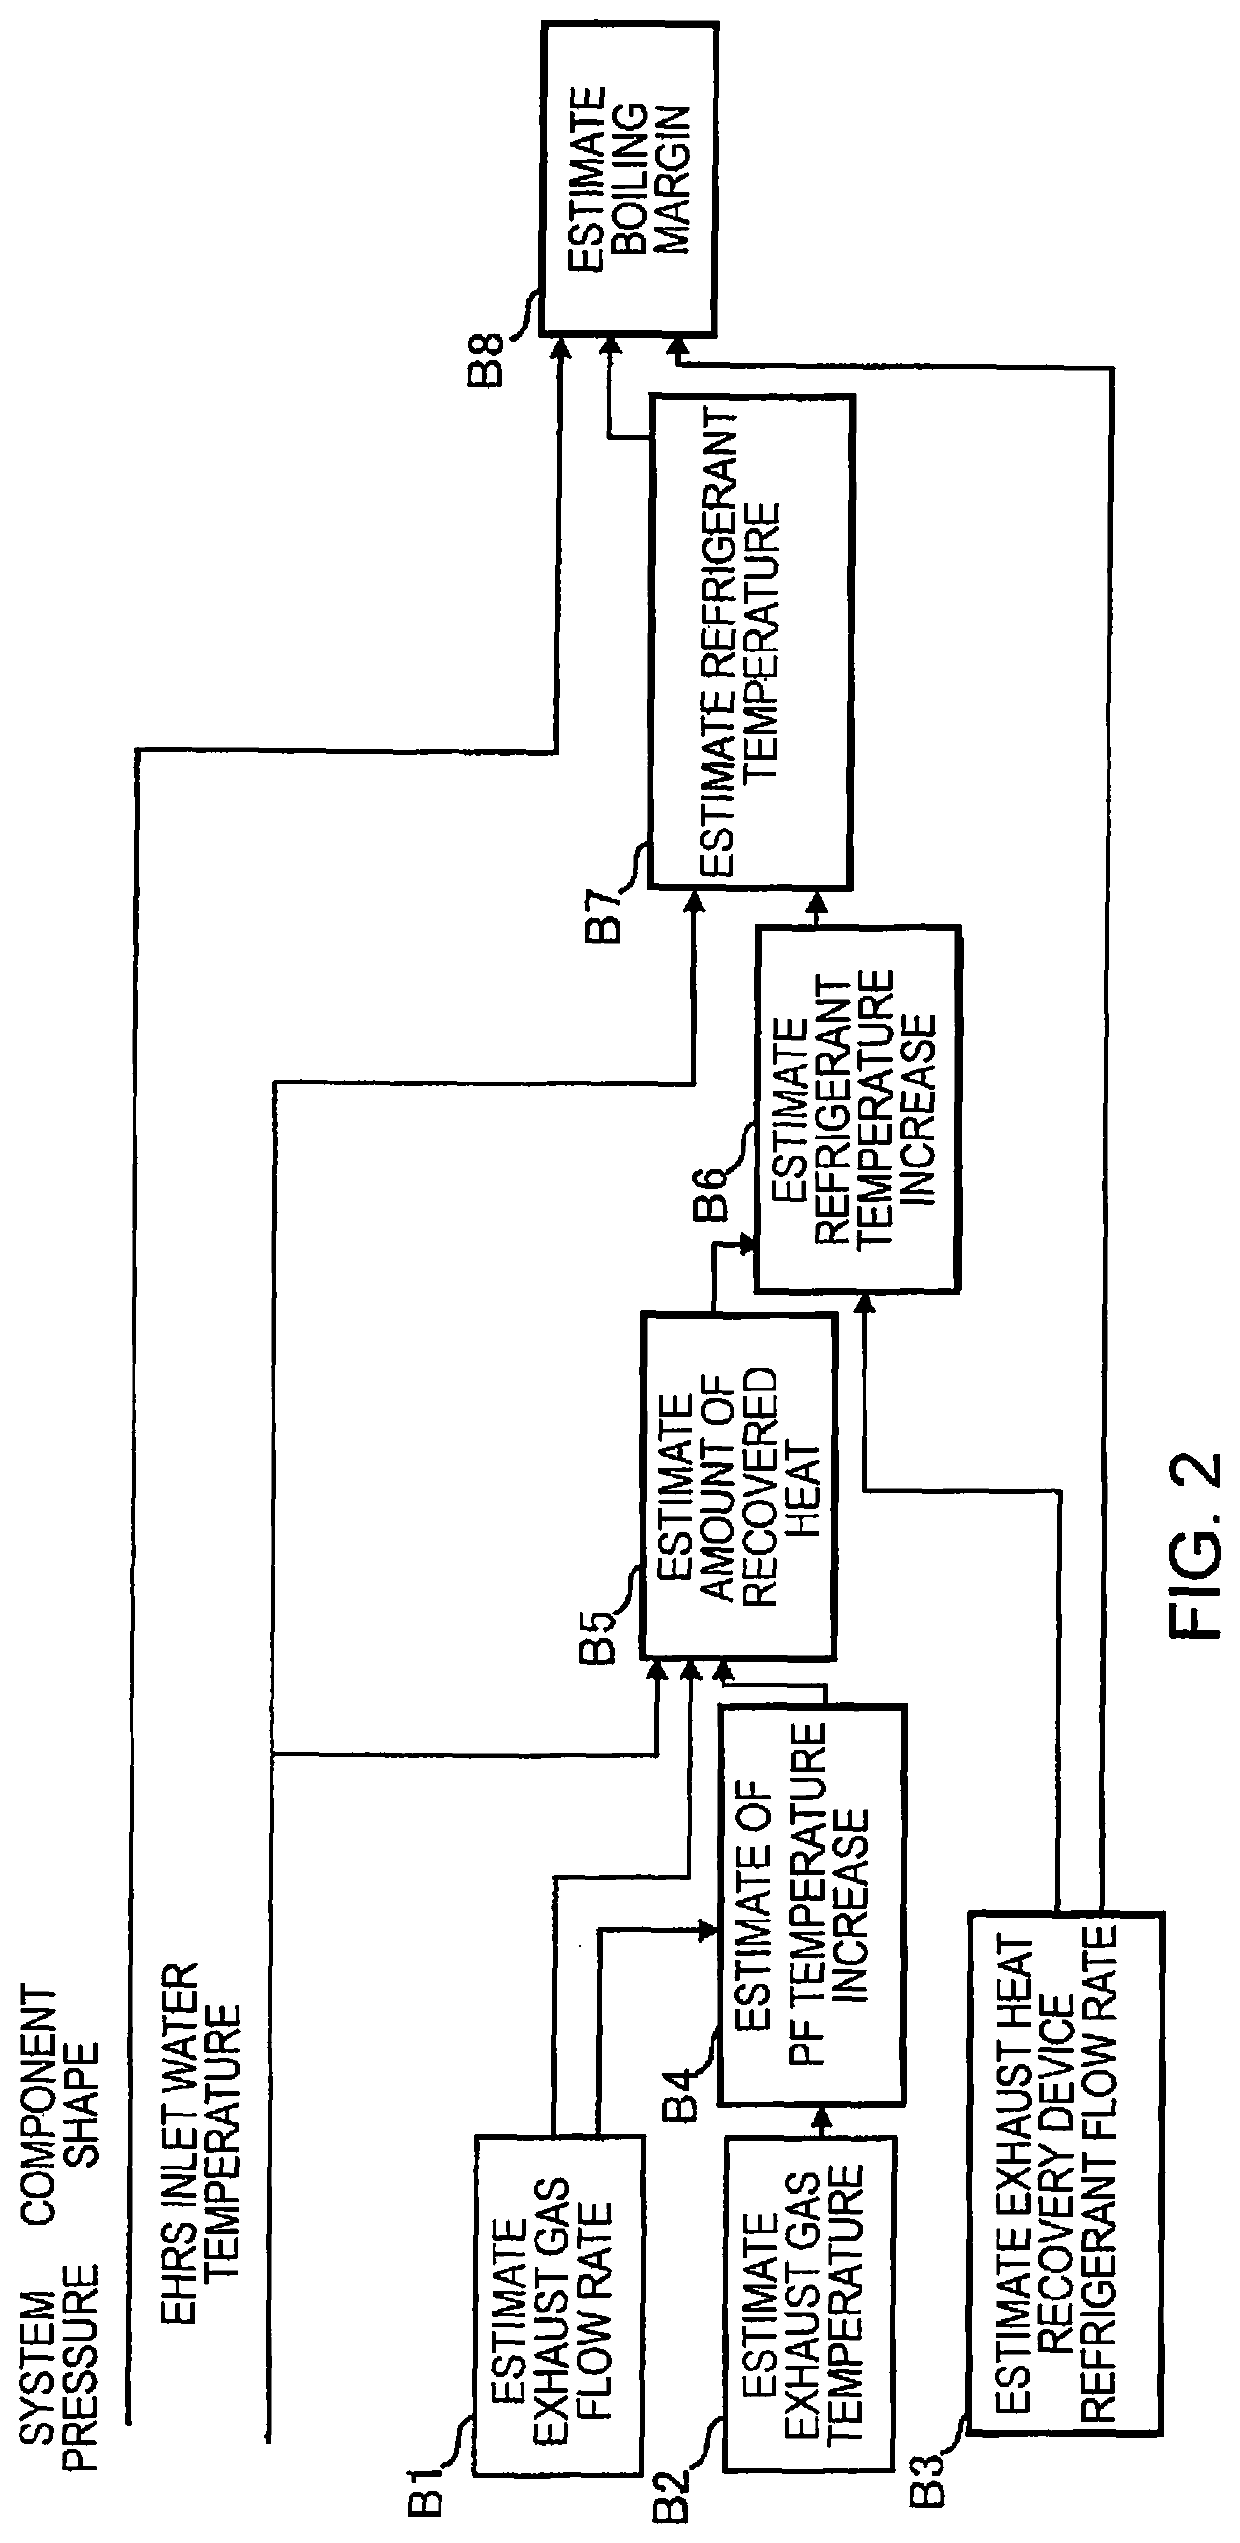 Internal combustion engine control method and internal combustion engine control device